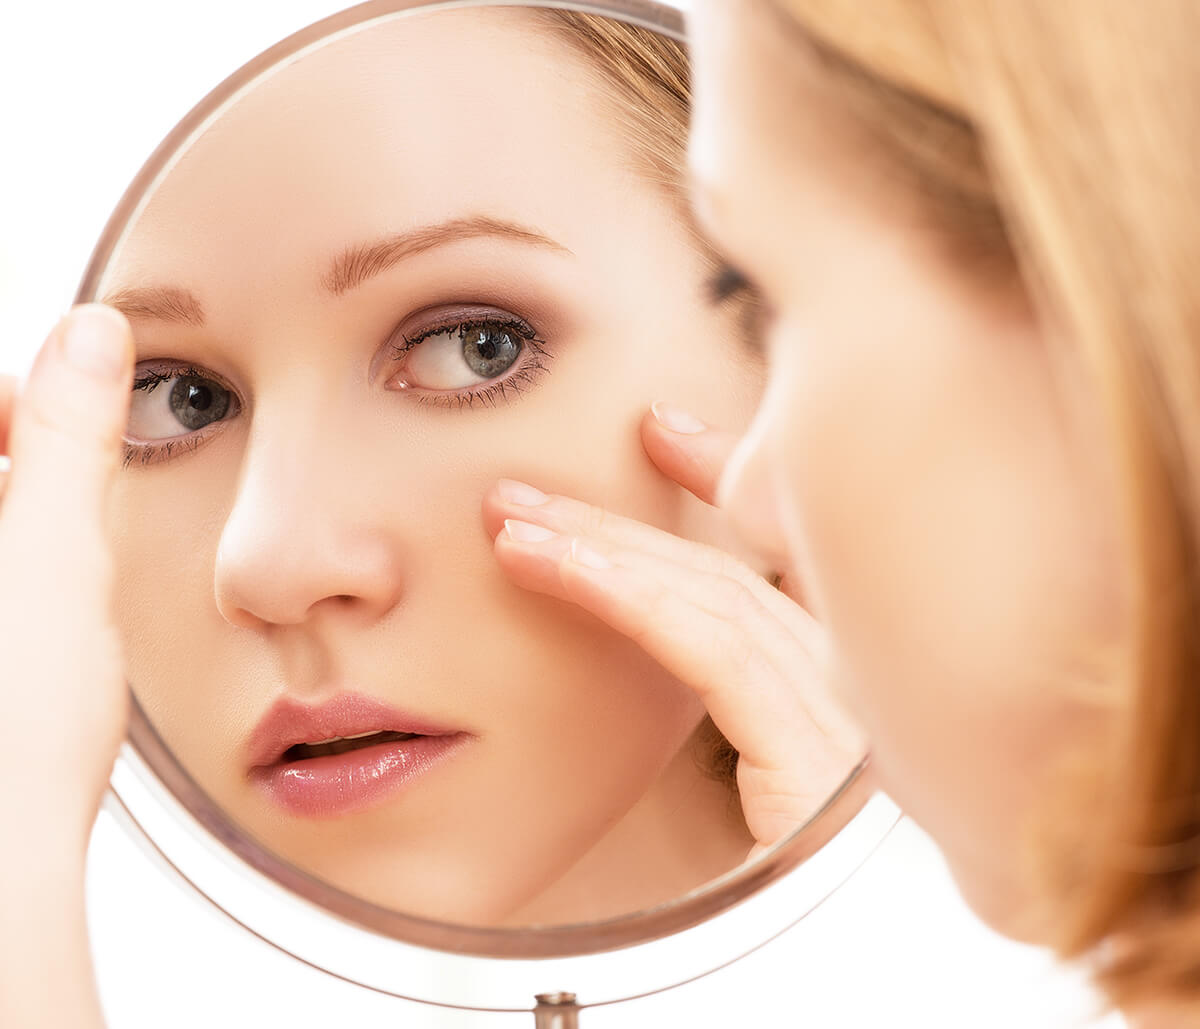 Learn More About the Best Treatment for Wrinkles and Folds from Botox Doctor in NYC Area